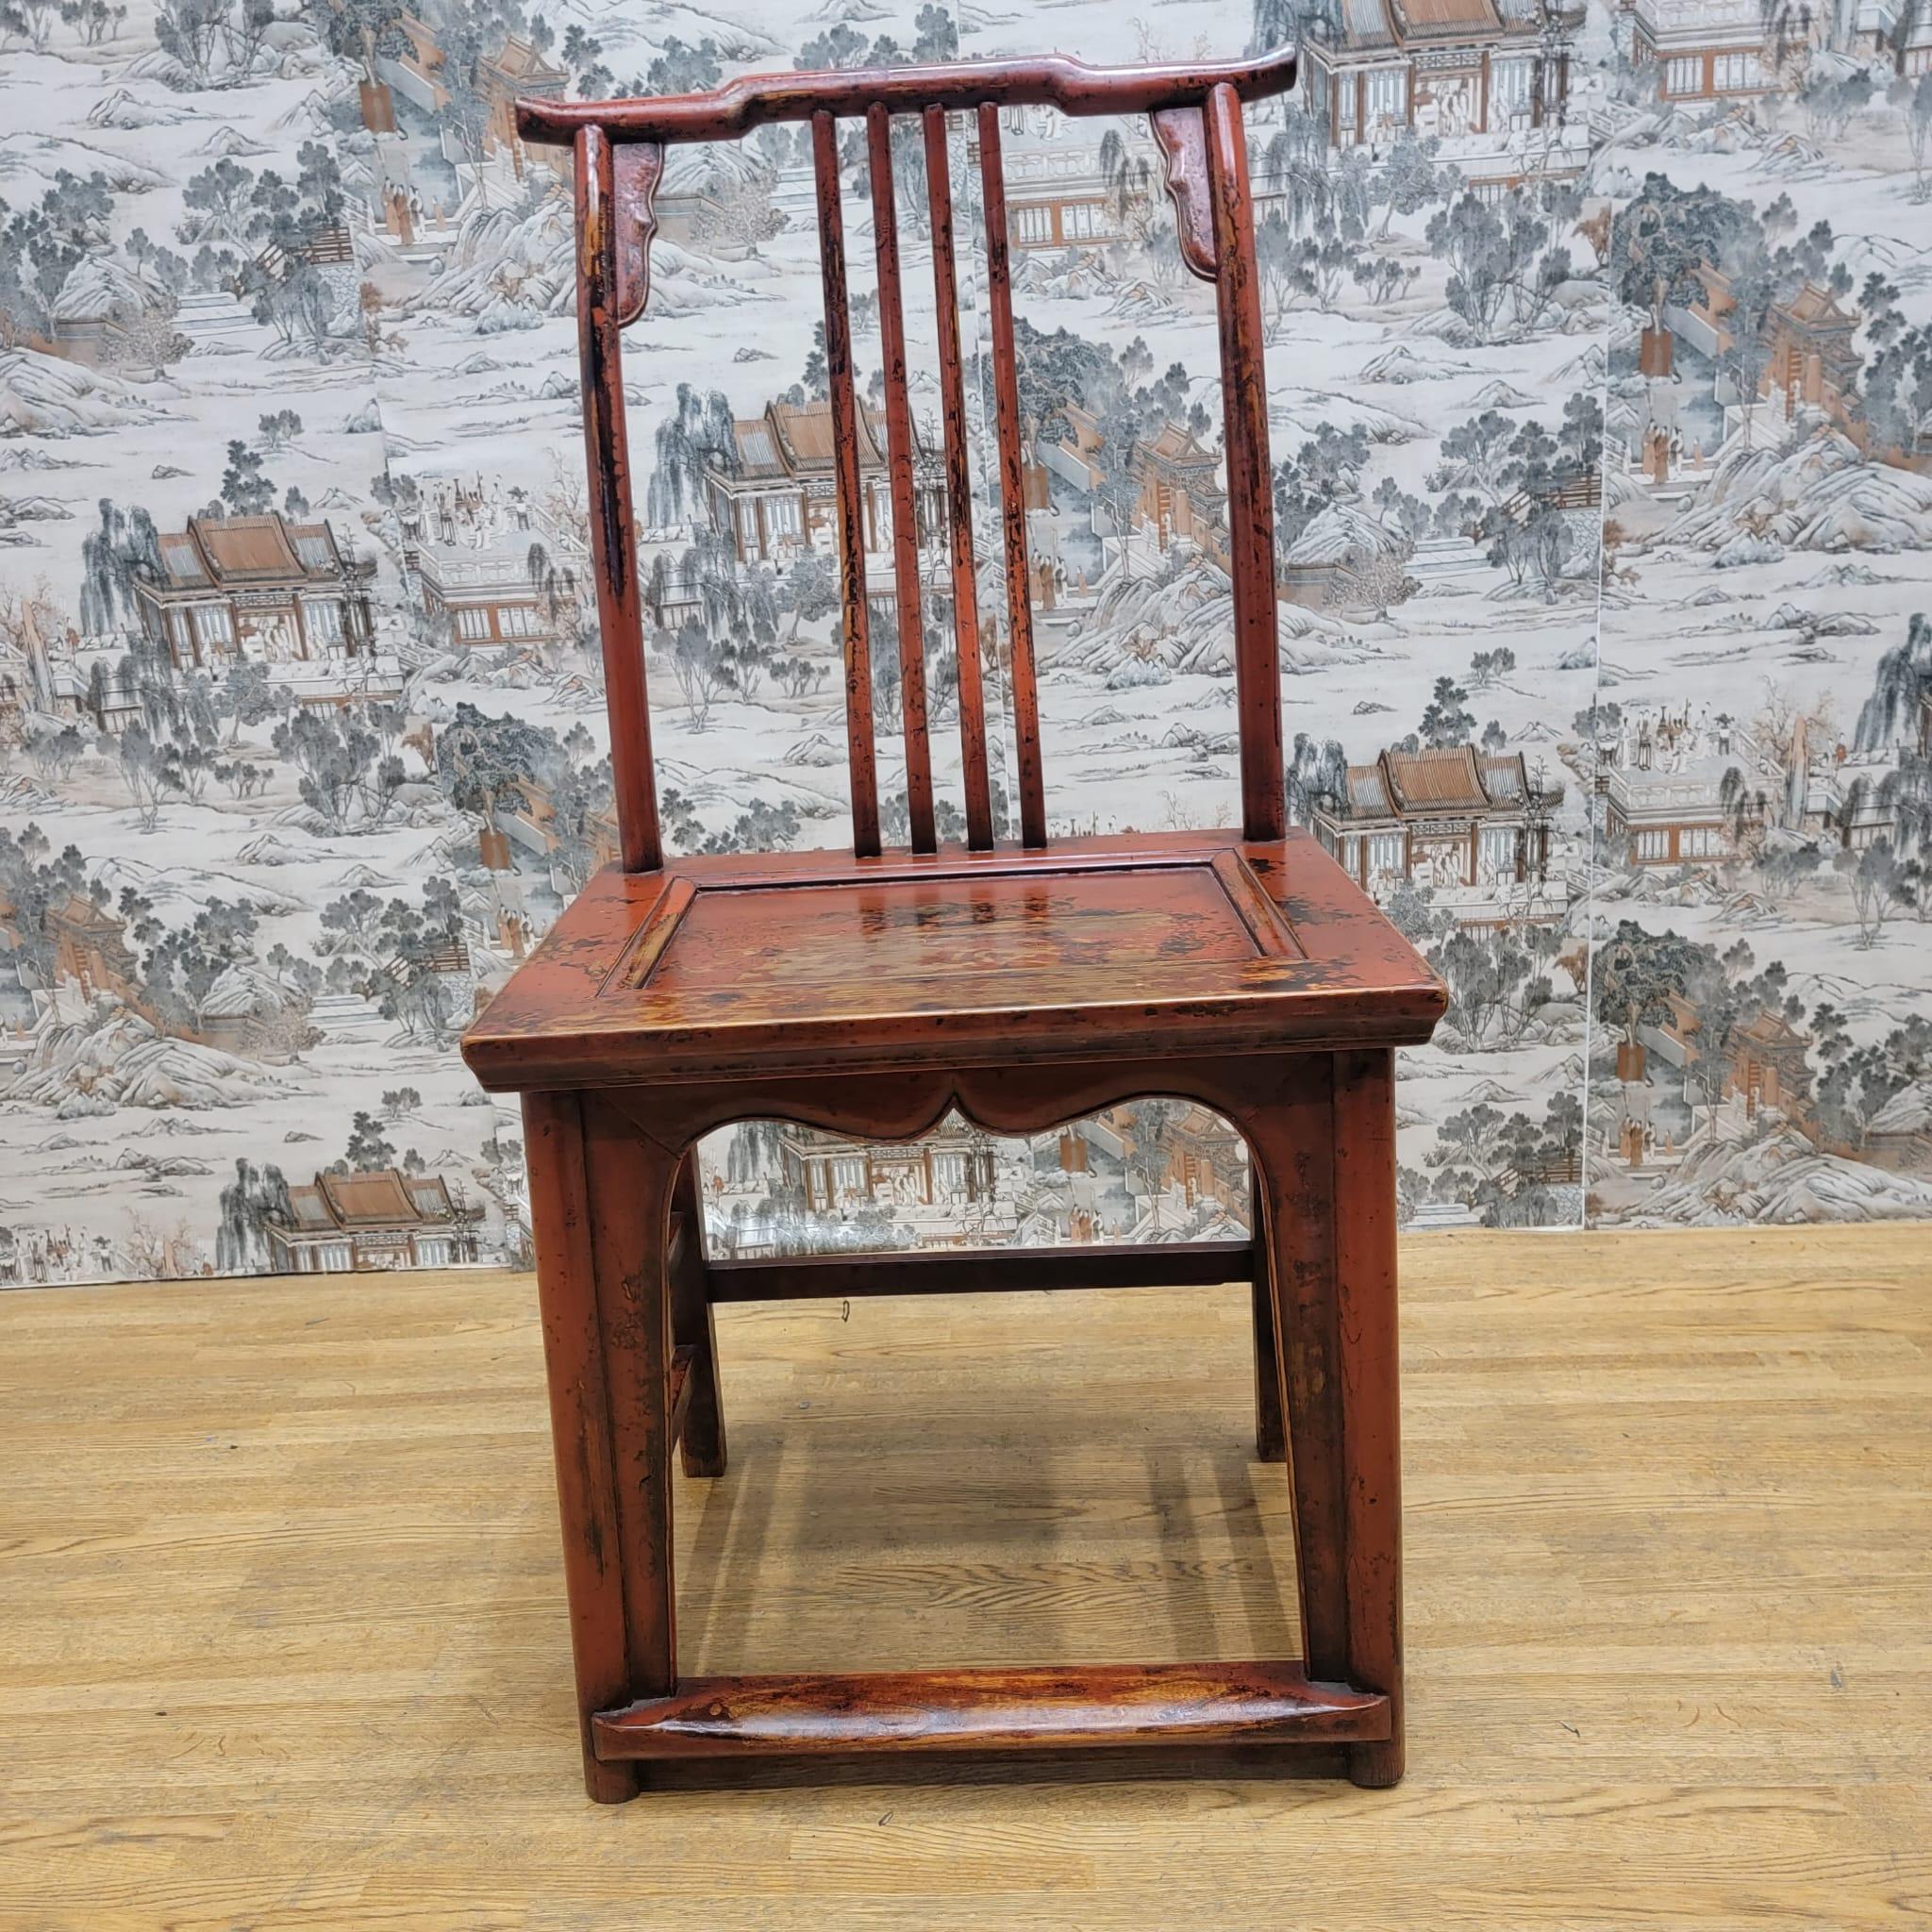 Antique Shanxi Province Red Lacquer Elm Side / Dining Chair

This beautiful red elm side chair from the Shanxi Province of China can be used as a statement piece in any room or be a great addition to a dining set. 

Dimensions:

H 41”
W 20.5”
D 16”